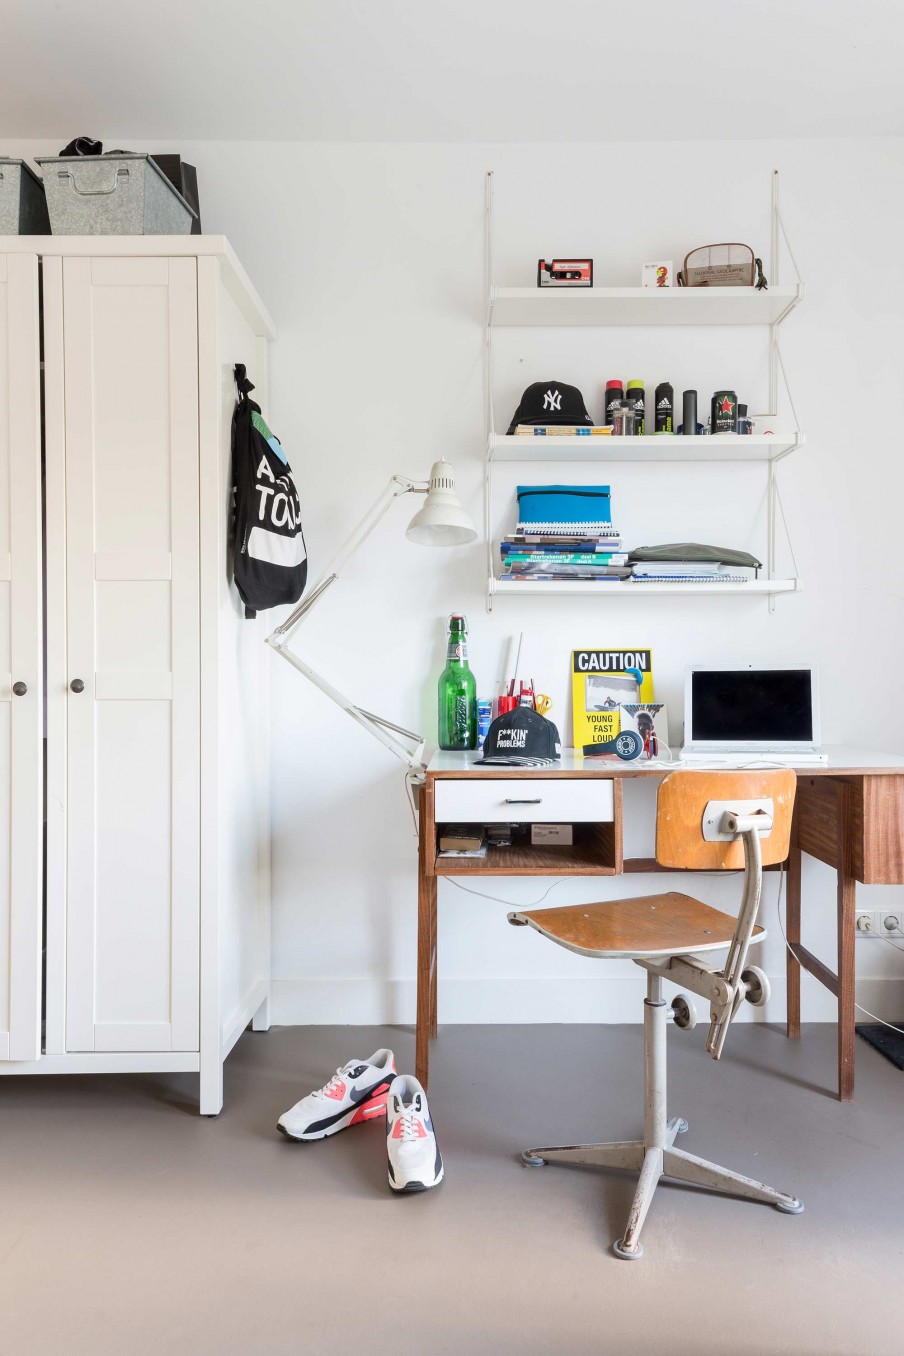 The home office corner is mid century modern with shabby furniture